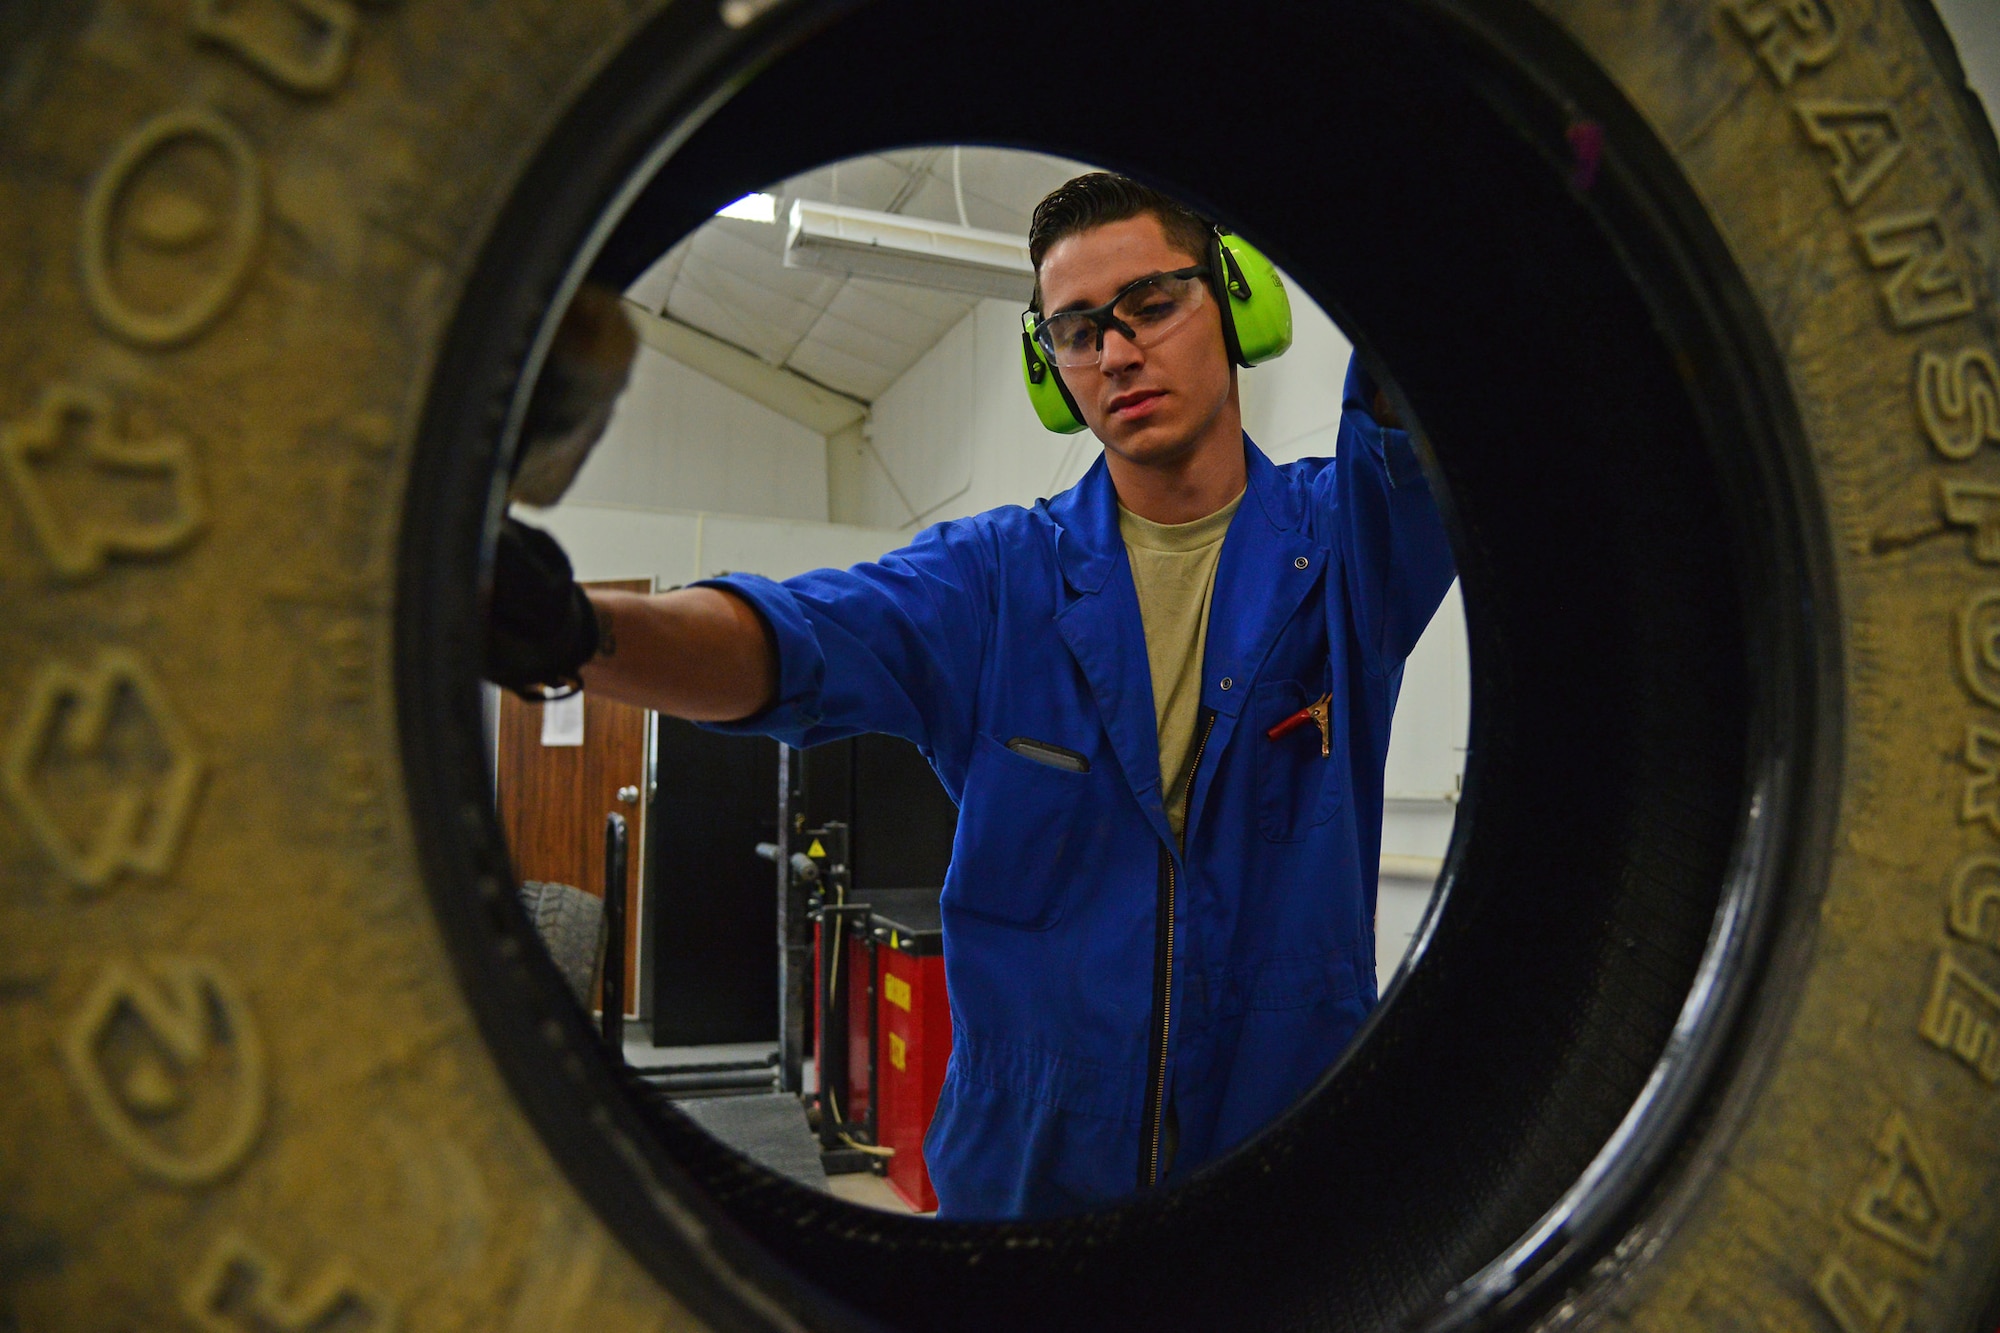 Senior Airman Brennan Popp, 341st Logistics Readiness Squadron mission generating vehicular equipment maintenance technician, lubricates the inside of a tire July 7, 2016, at Malmstrom Air Force Base, Mont. The lubrication helps the tire fit over a rim when a new tire is mounted. (U.S. Air Force photo/Airman 1st Class Daniel Brosam)